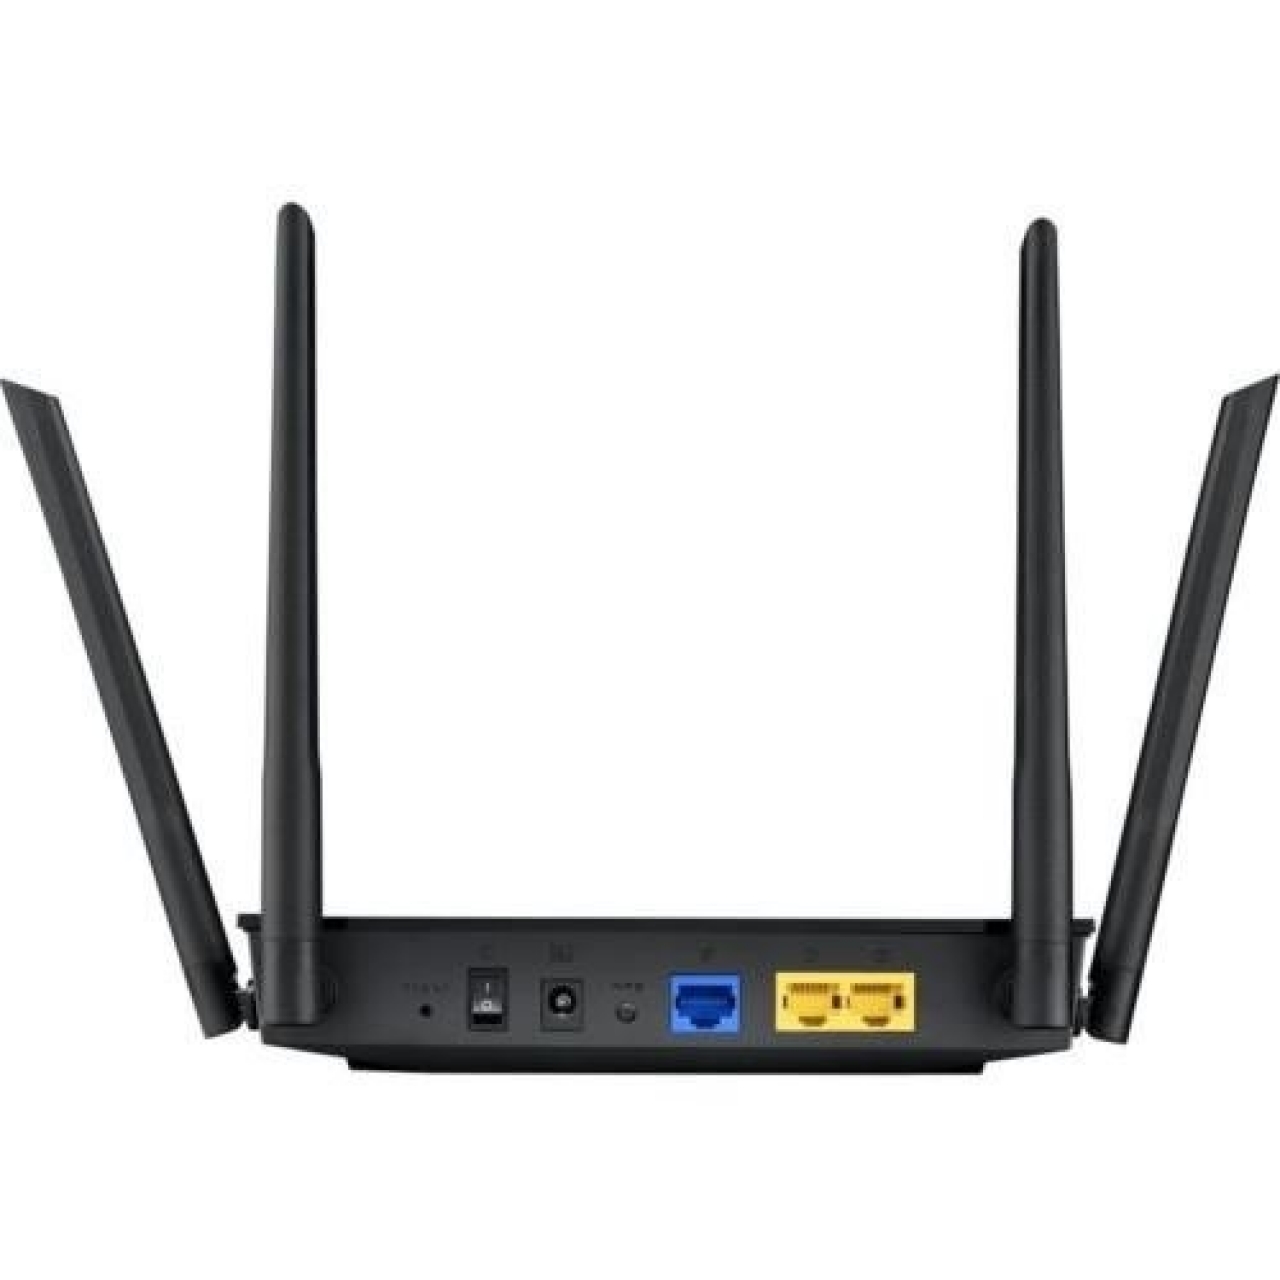 ASUS RT-N19 600mbps N600 2.4GHZ EV Ofis Tipi Router 4x harici anten